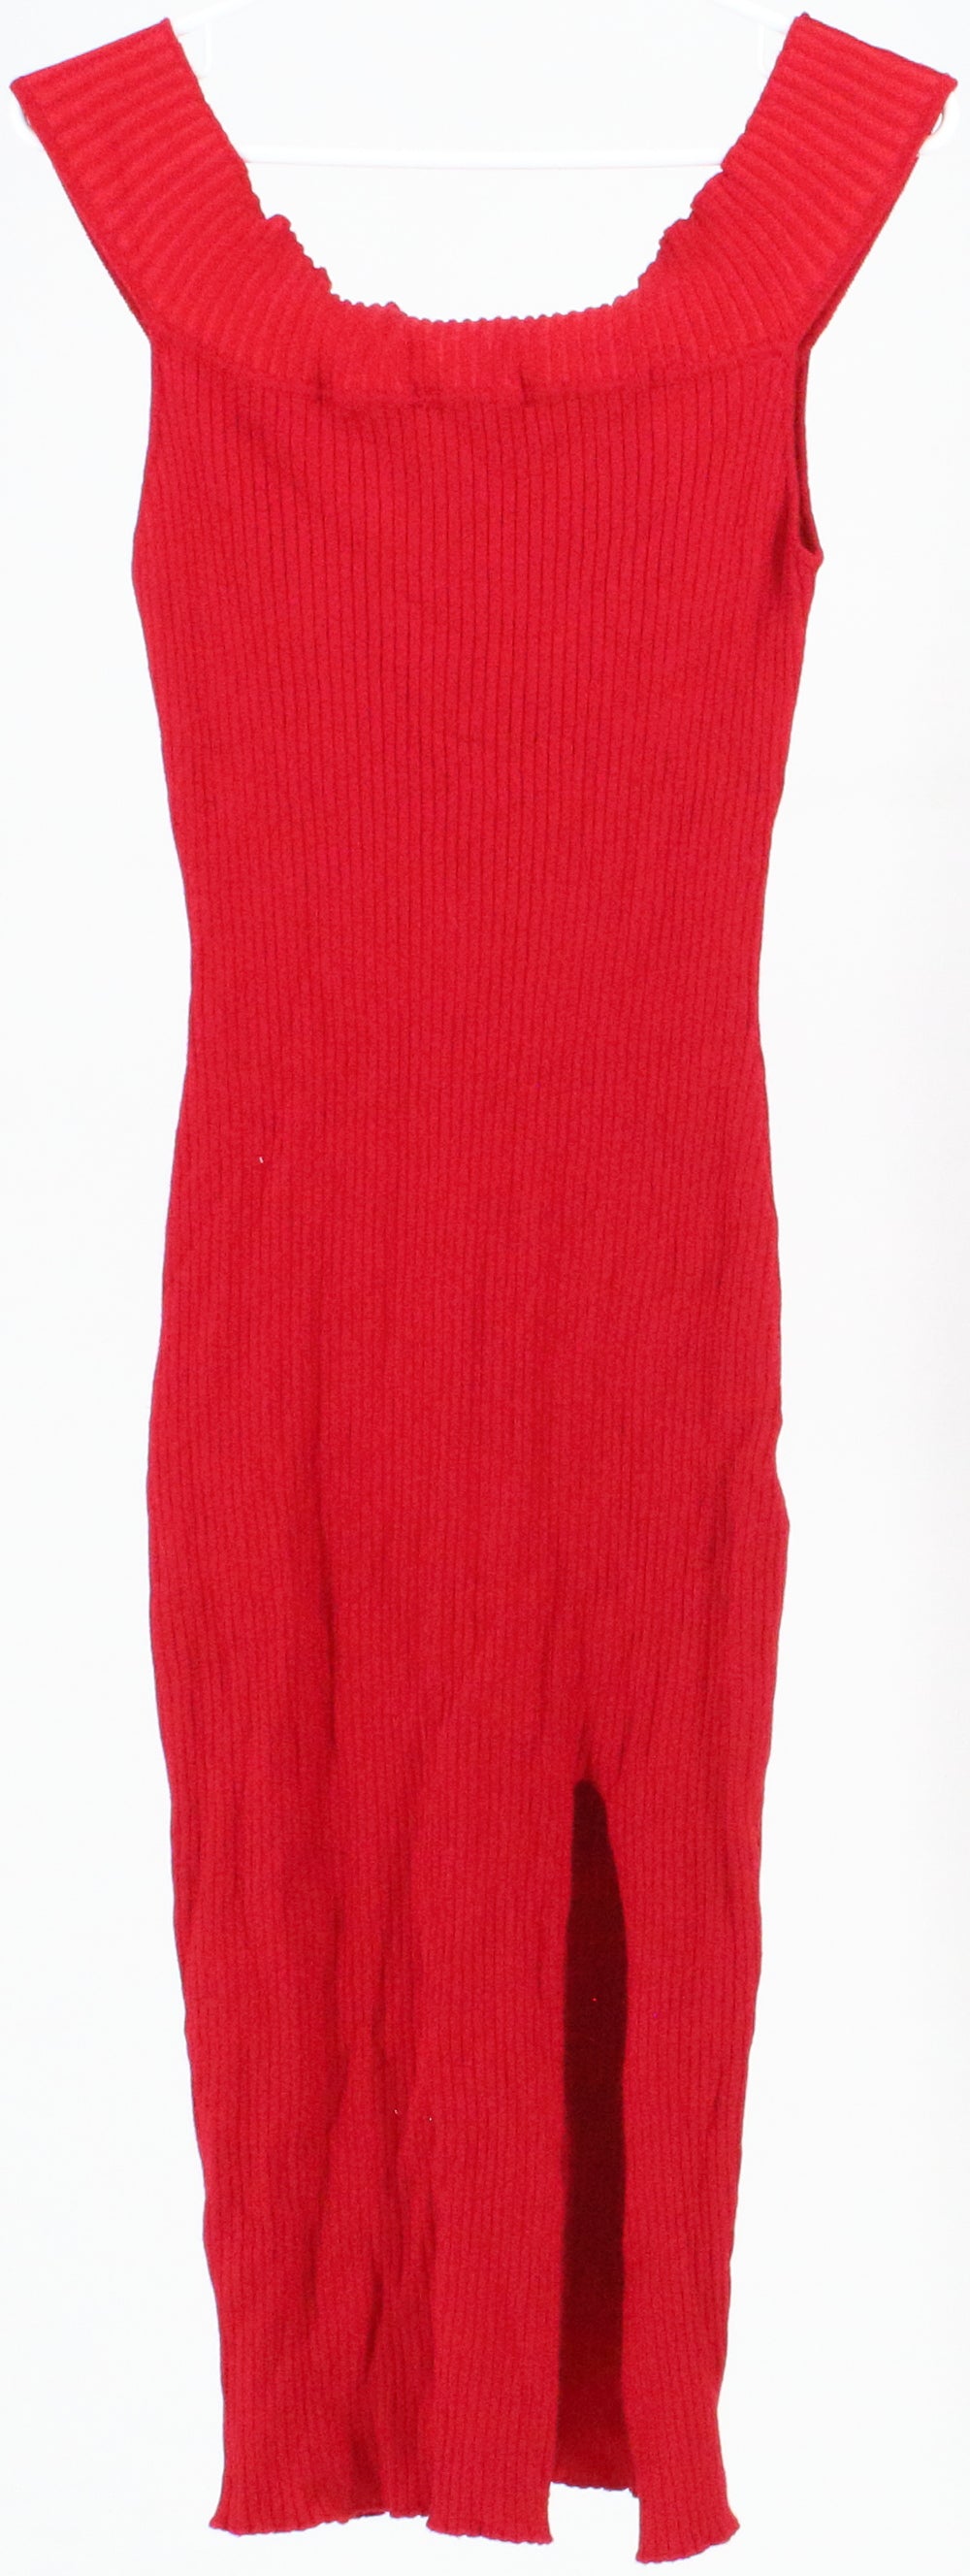 About Us Red Knit Dress